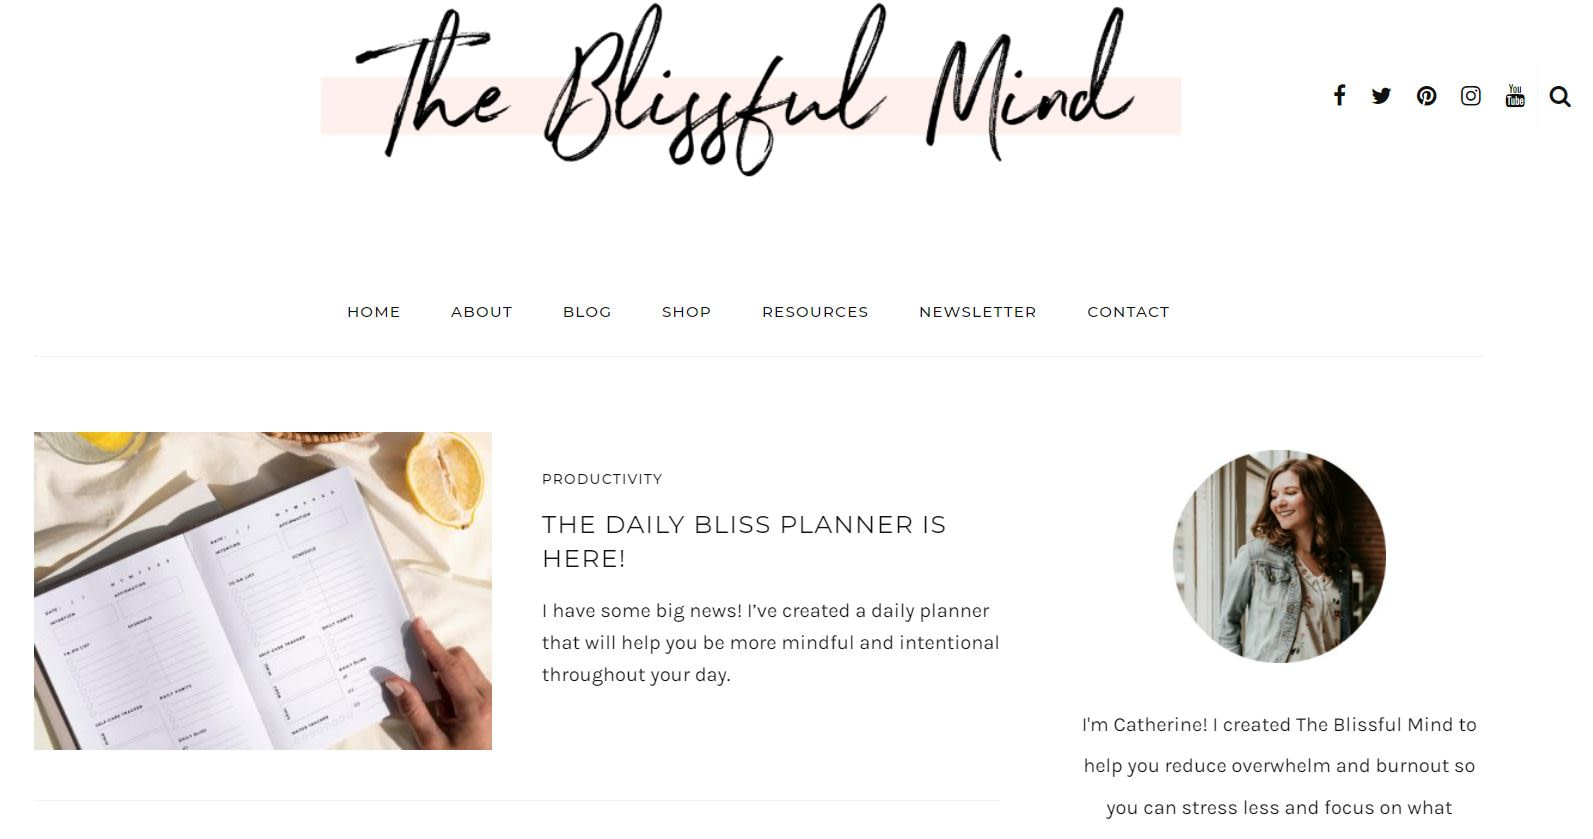 The Blissful Mind blog on self-care, which is one of the most profitable blog niches in 2024.